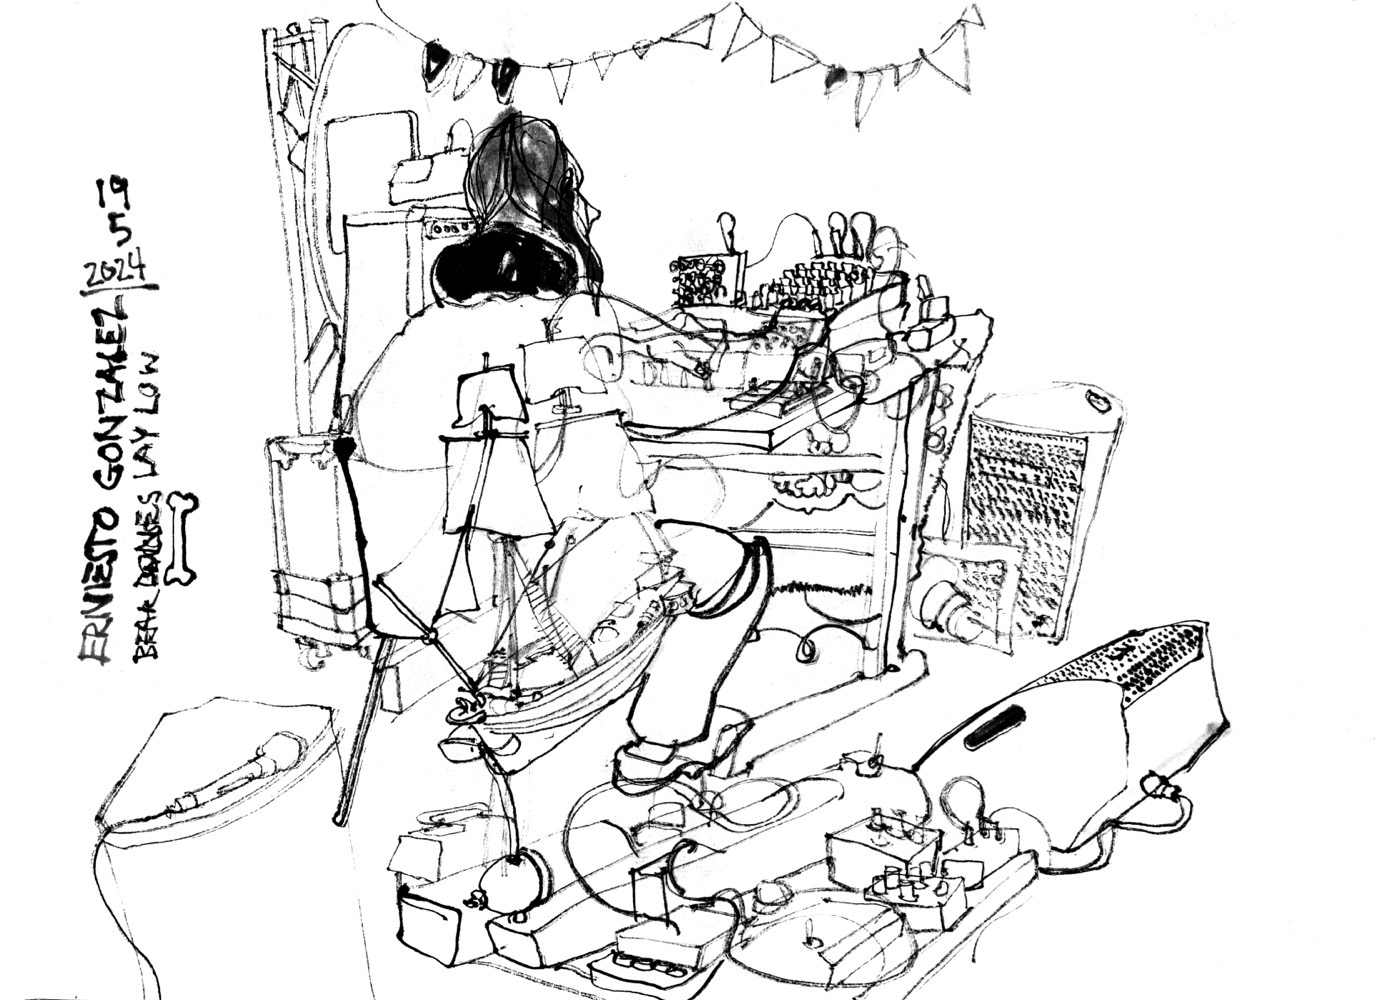 Ink drawing of a musician at a desk with electronic devices.